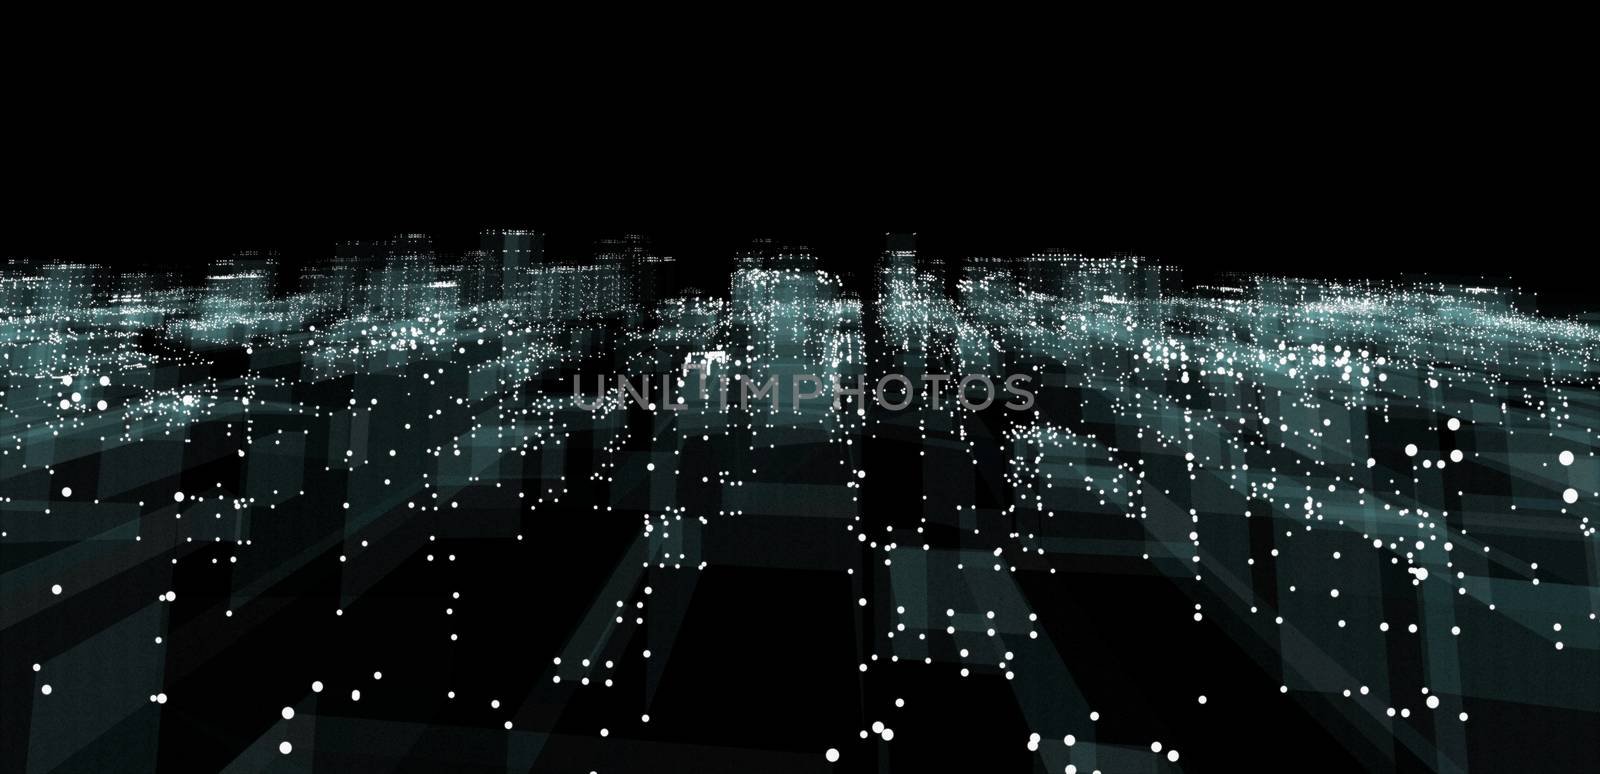 Abstract 3d city rendering. Digital skyscrappers. Perspective architecture background with skyscrapers. 3d illustration